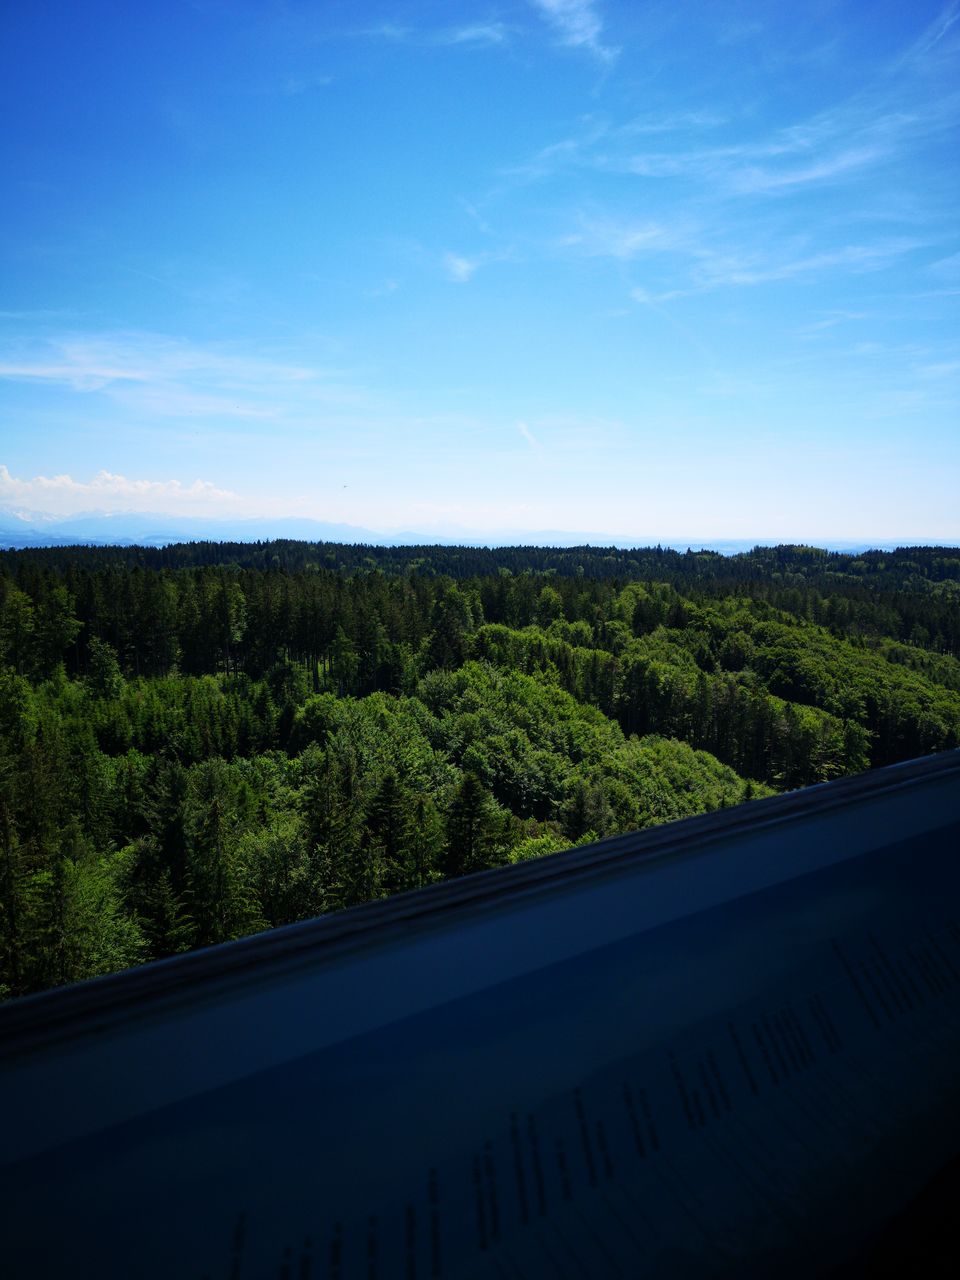 SCENIC VIEW OF FOREST AGAINST SKY